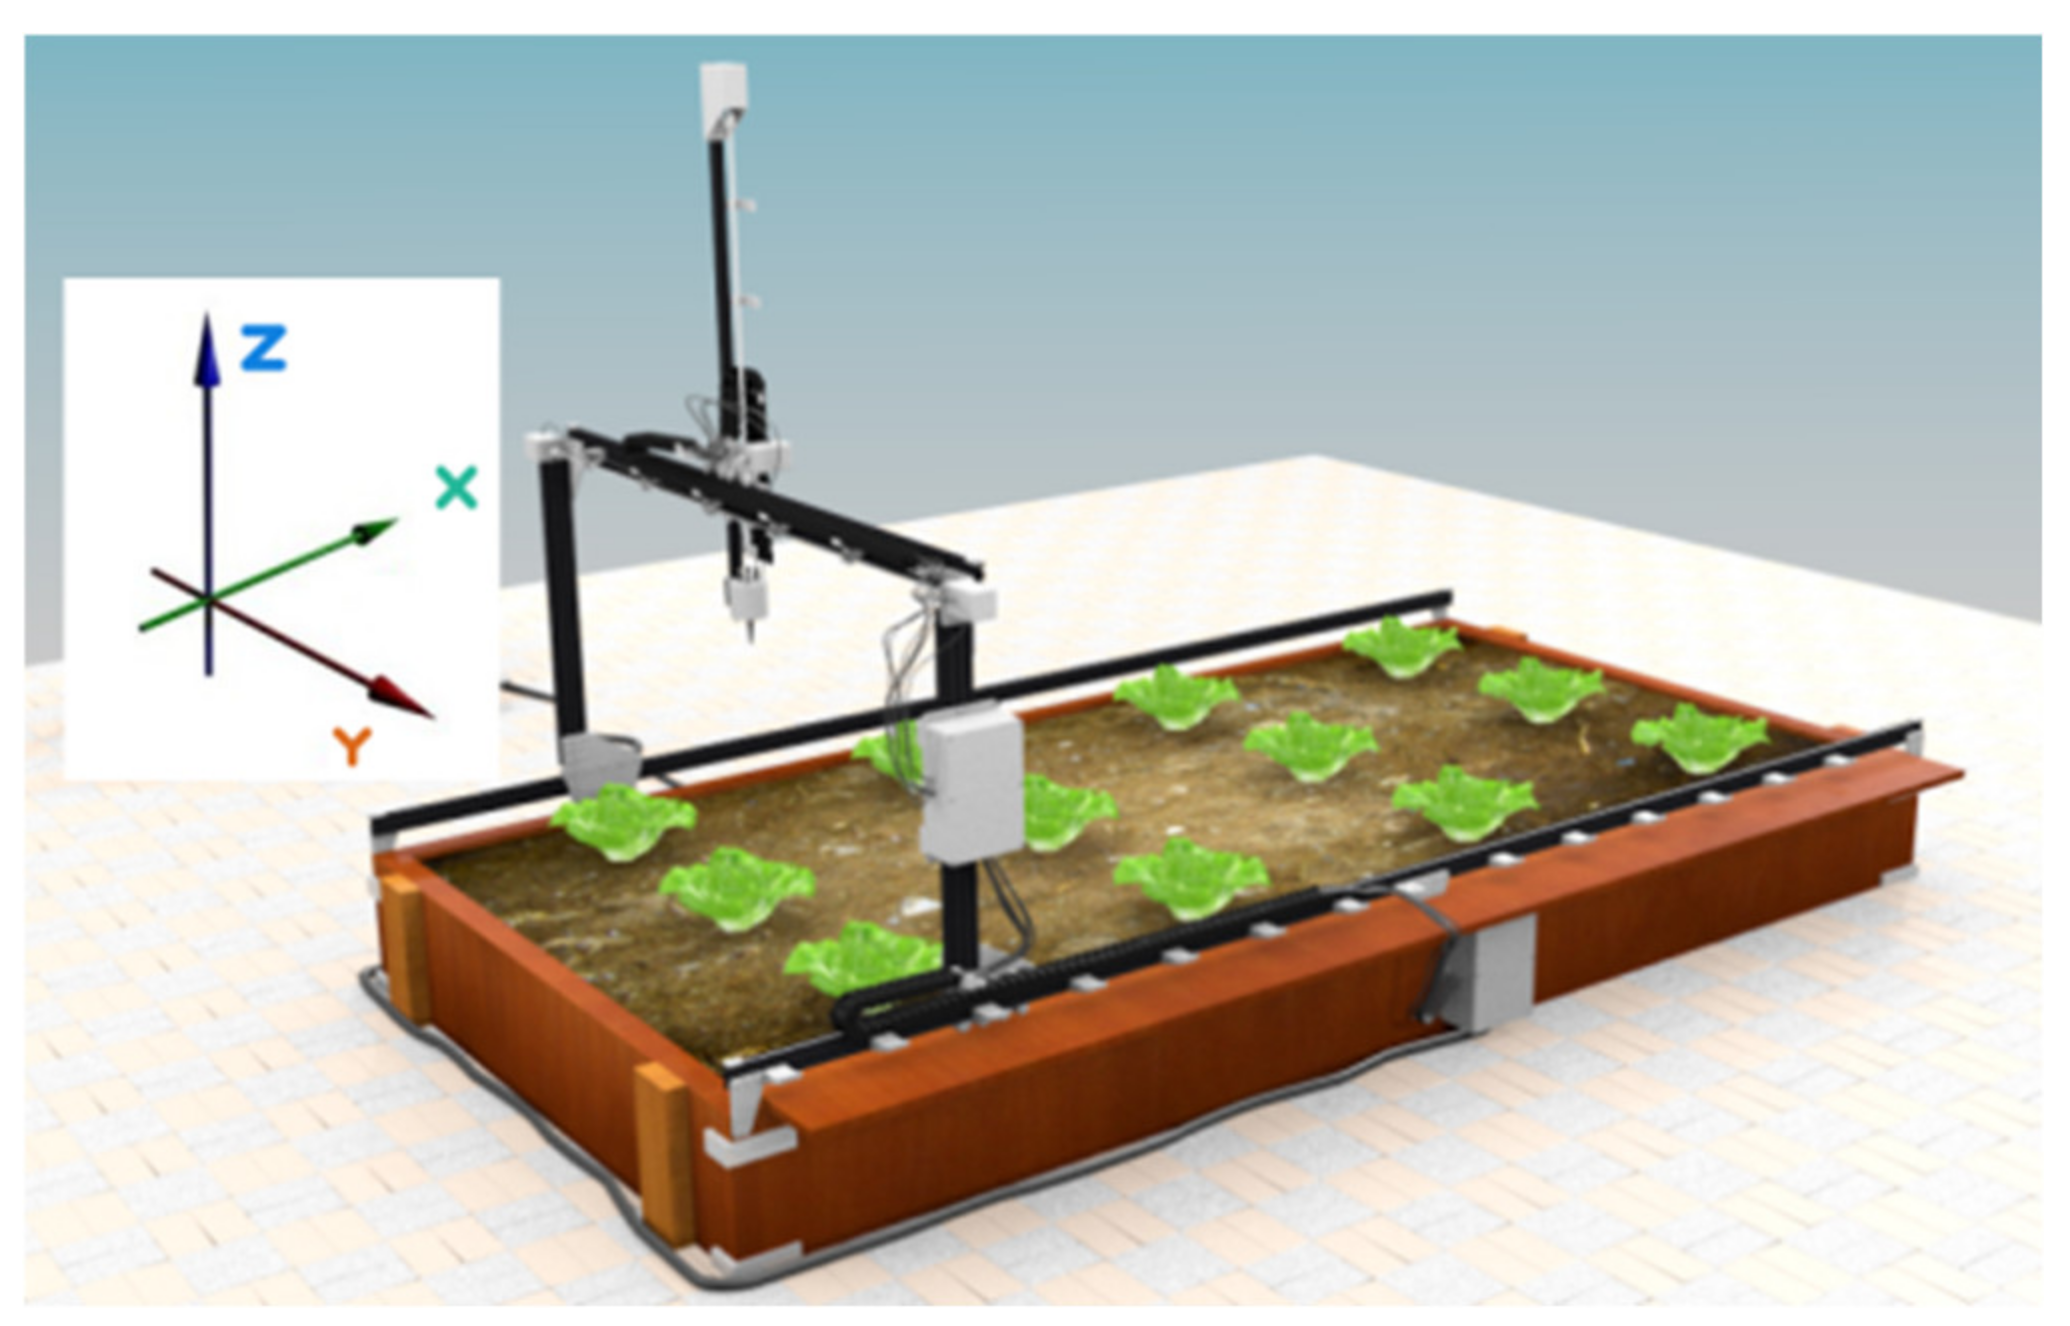 Micromachines | Free | and of an Urban Farming Robot